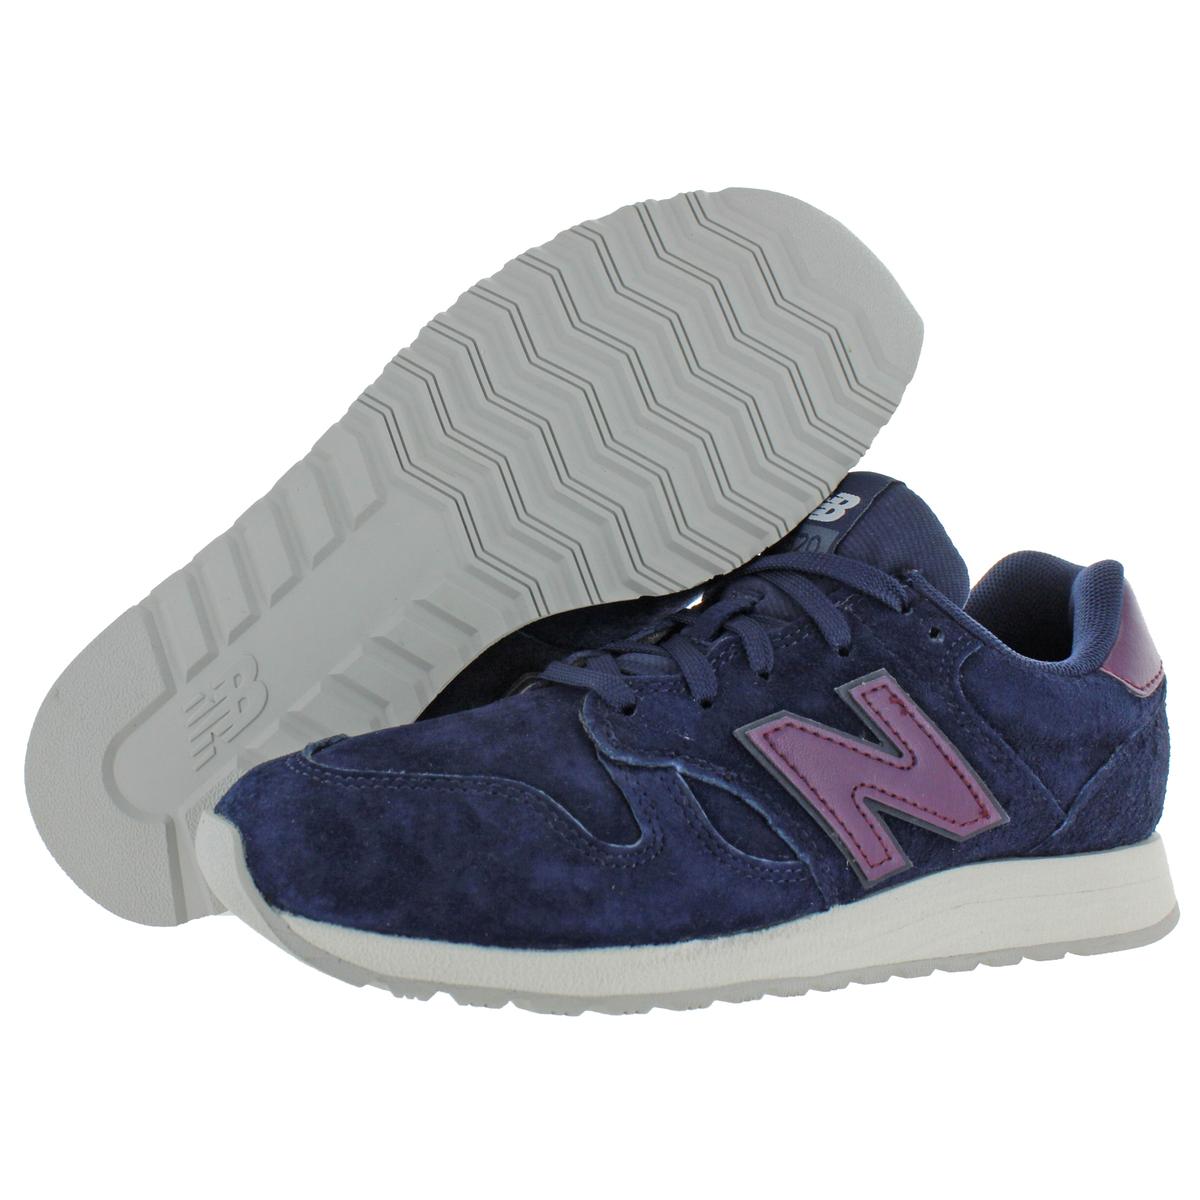 New Balance Women's WL520 Suede Casual Lifestyle Athletic Sneakers ...